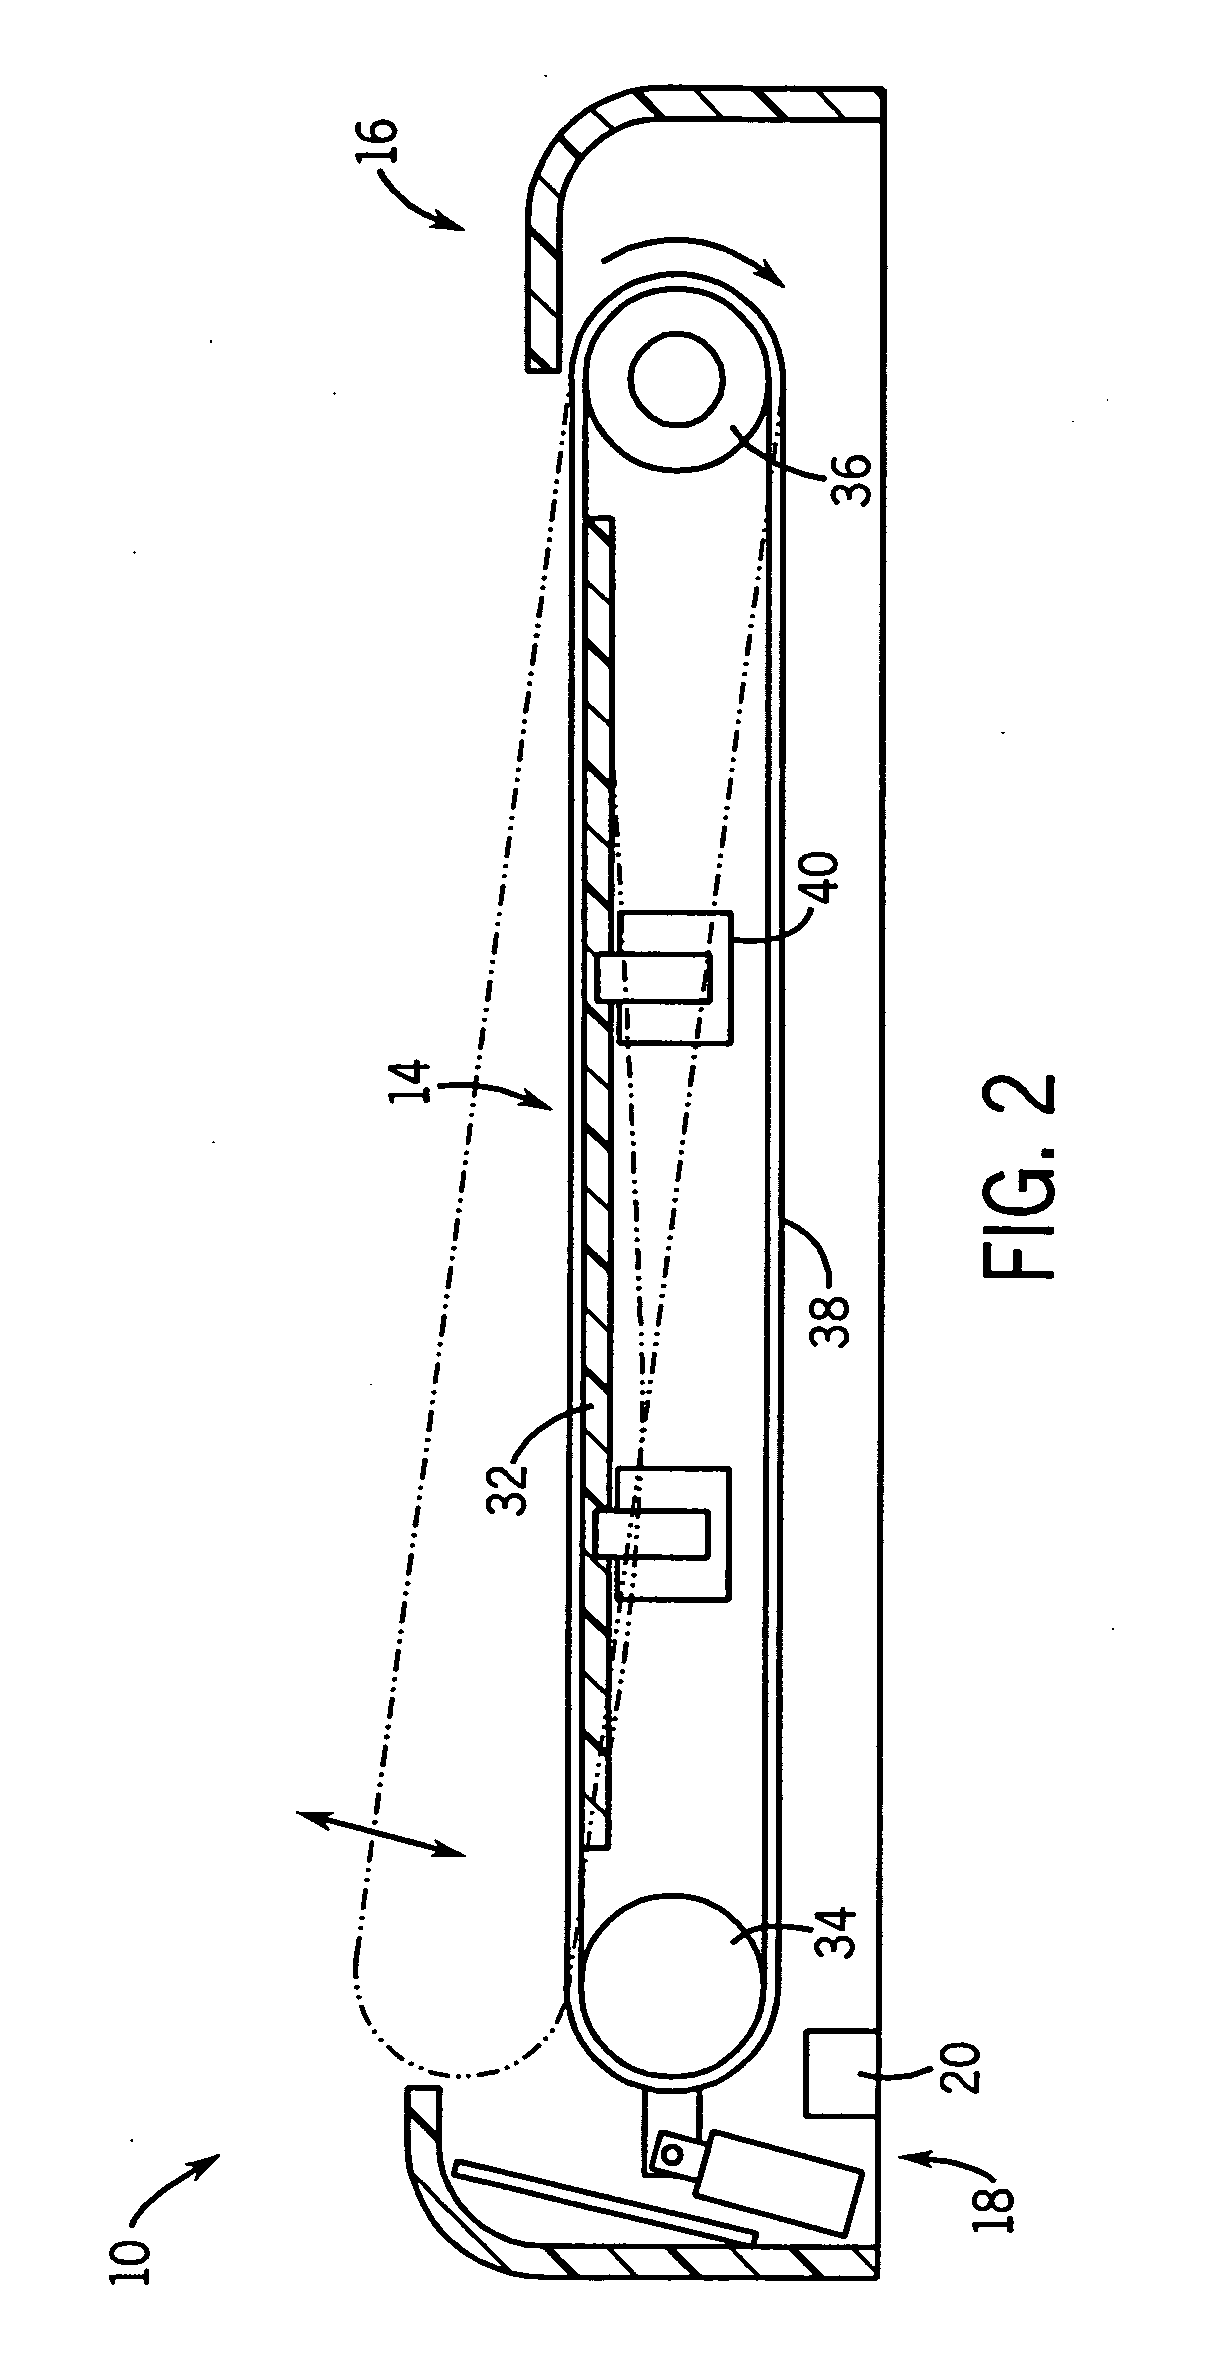 Parameter sensing system for an exercise device